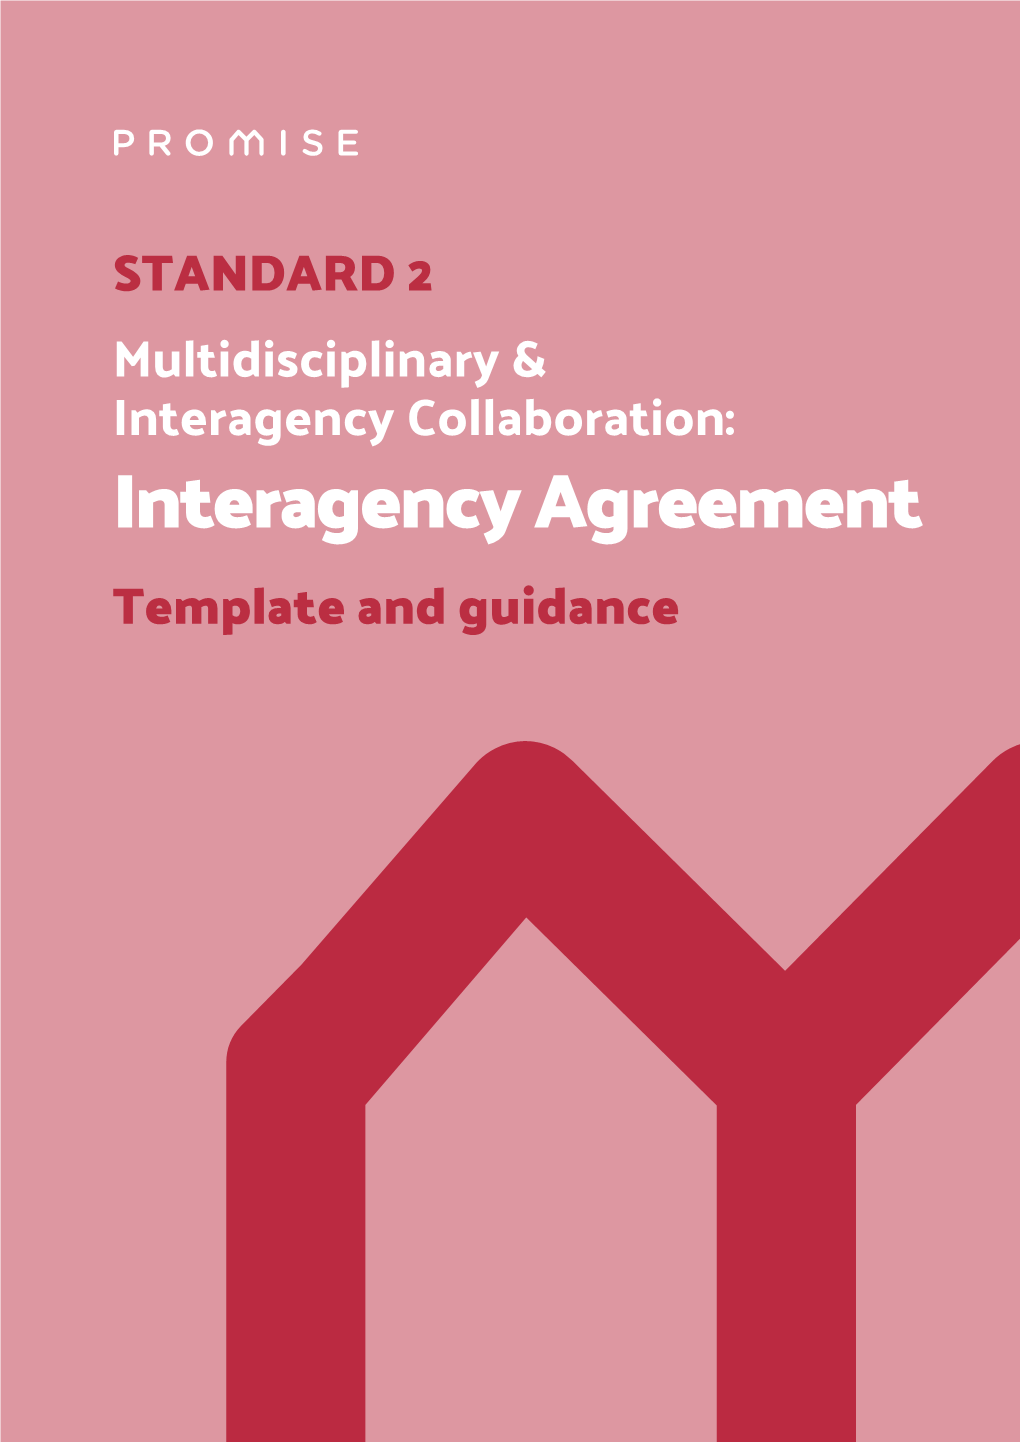 Interagency Agreement Template and Guidance